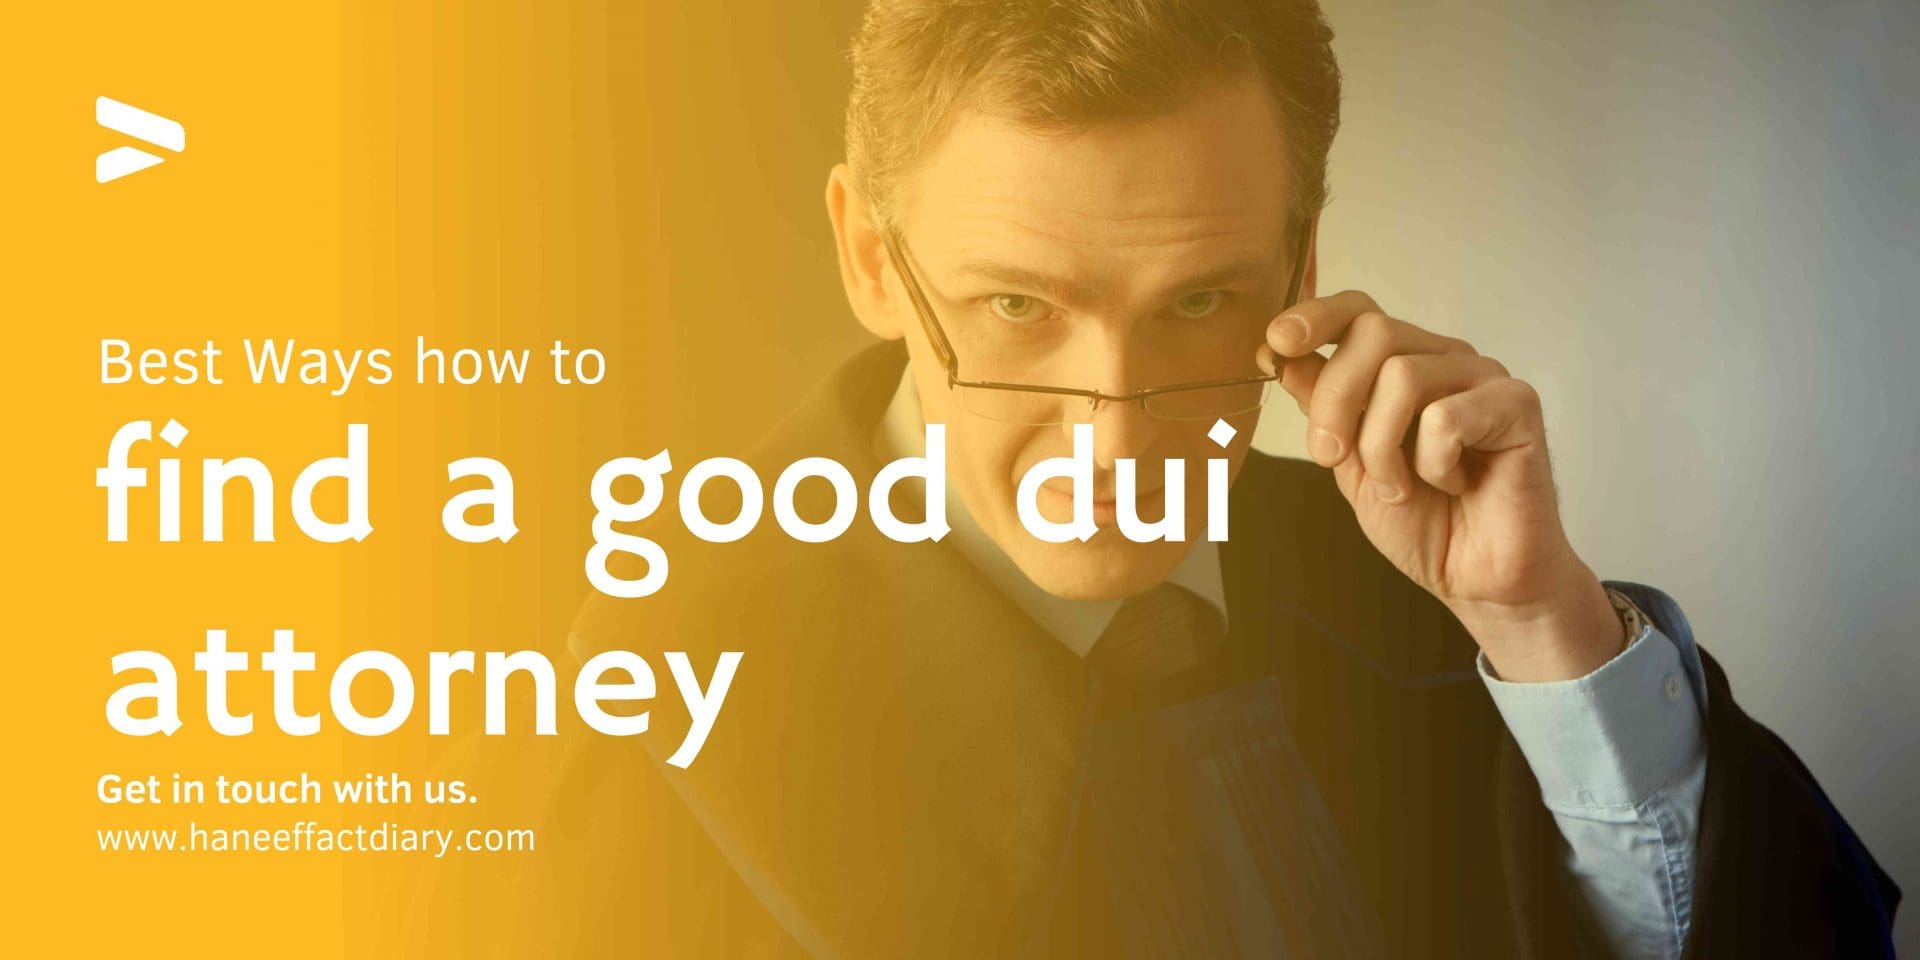 How to find a good dui attorney 2022